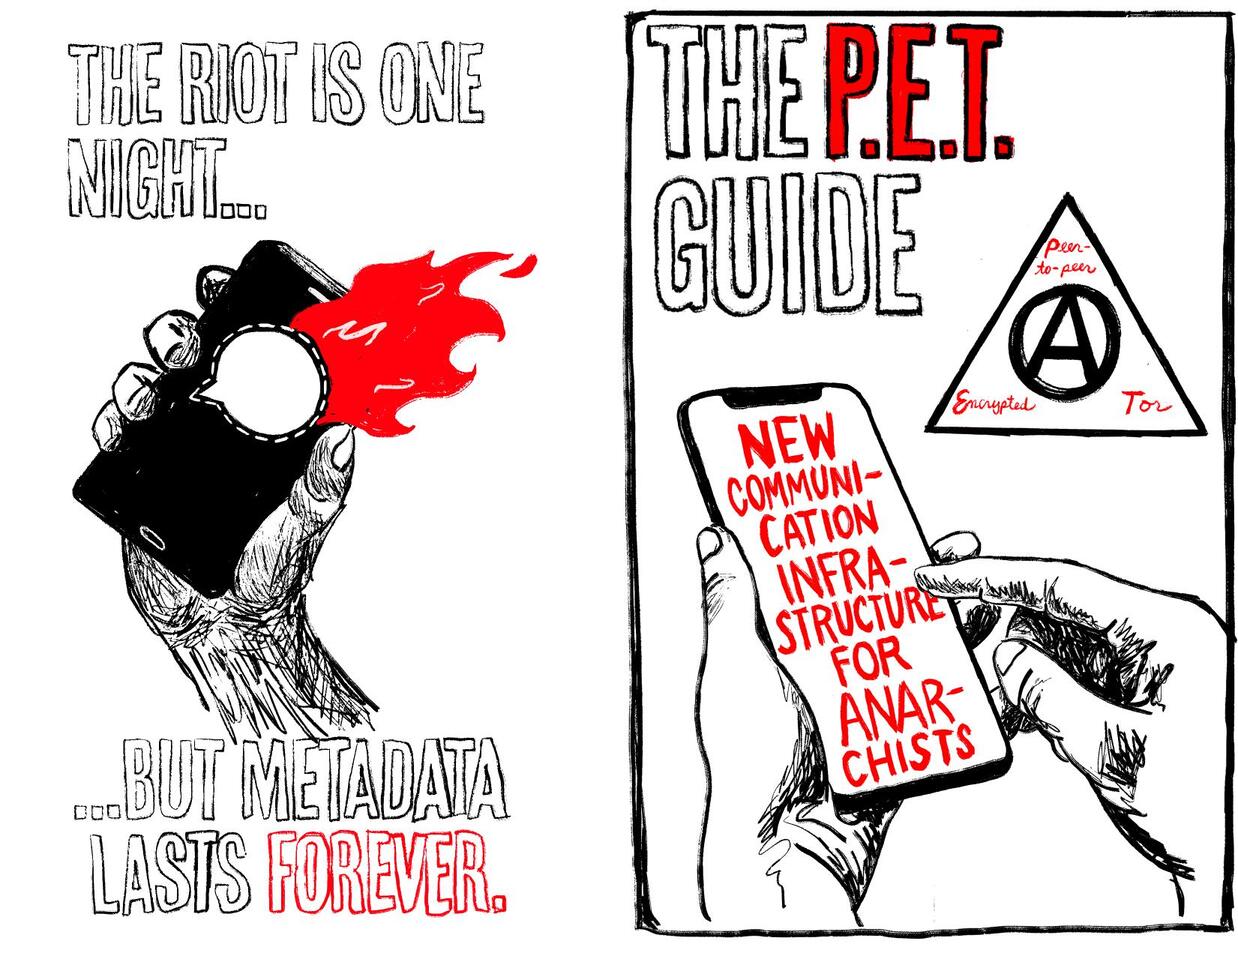 Cover: The P.E.T. Guide: New Communication Infrastructure for Anarchists